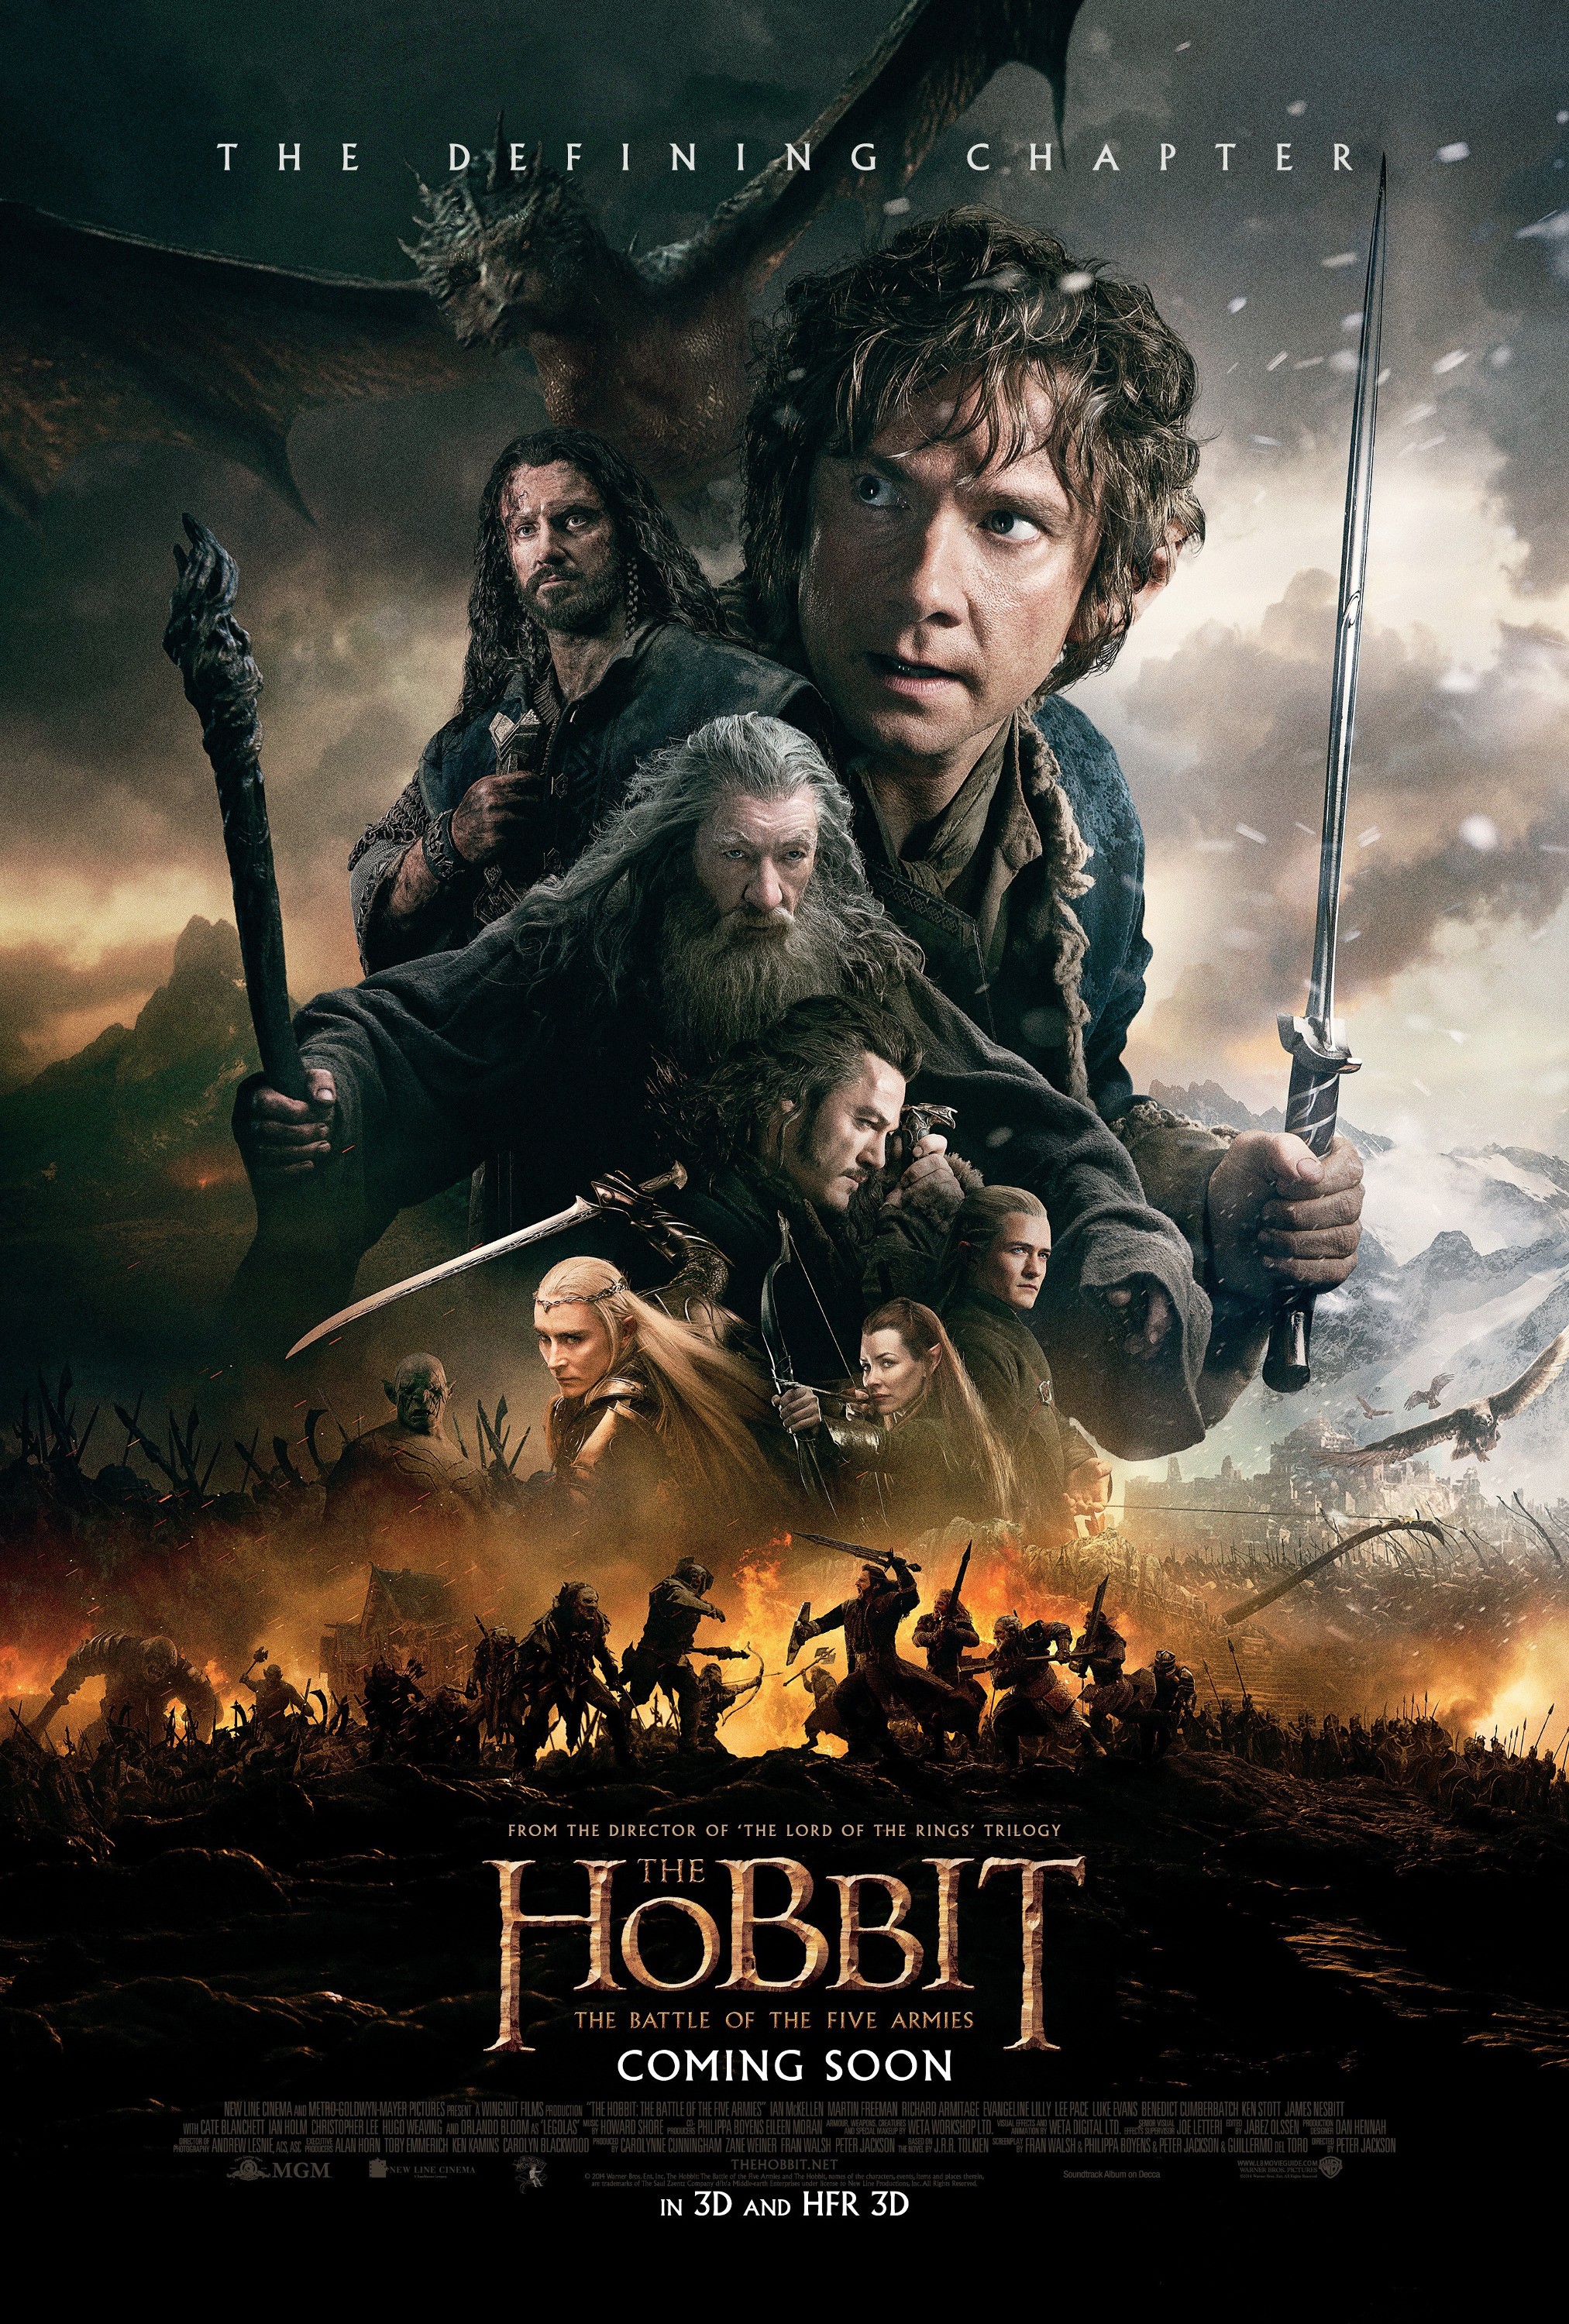 Mega Sized Movie Poster Image for The Hobbit: The Battle of the Five Armies (#21 of 28)